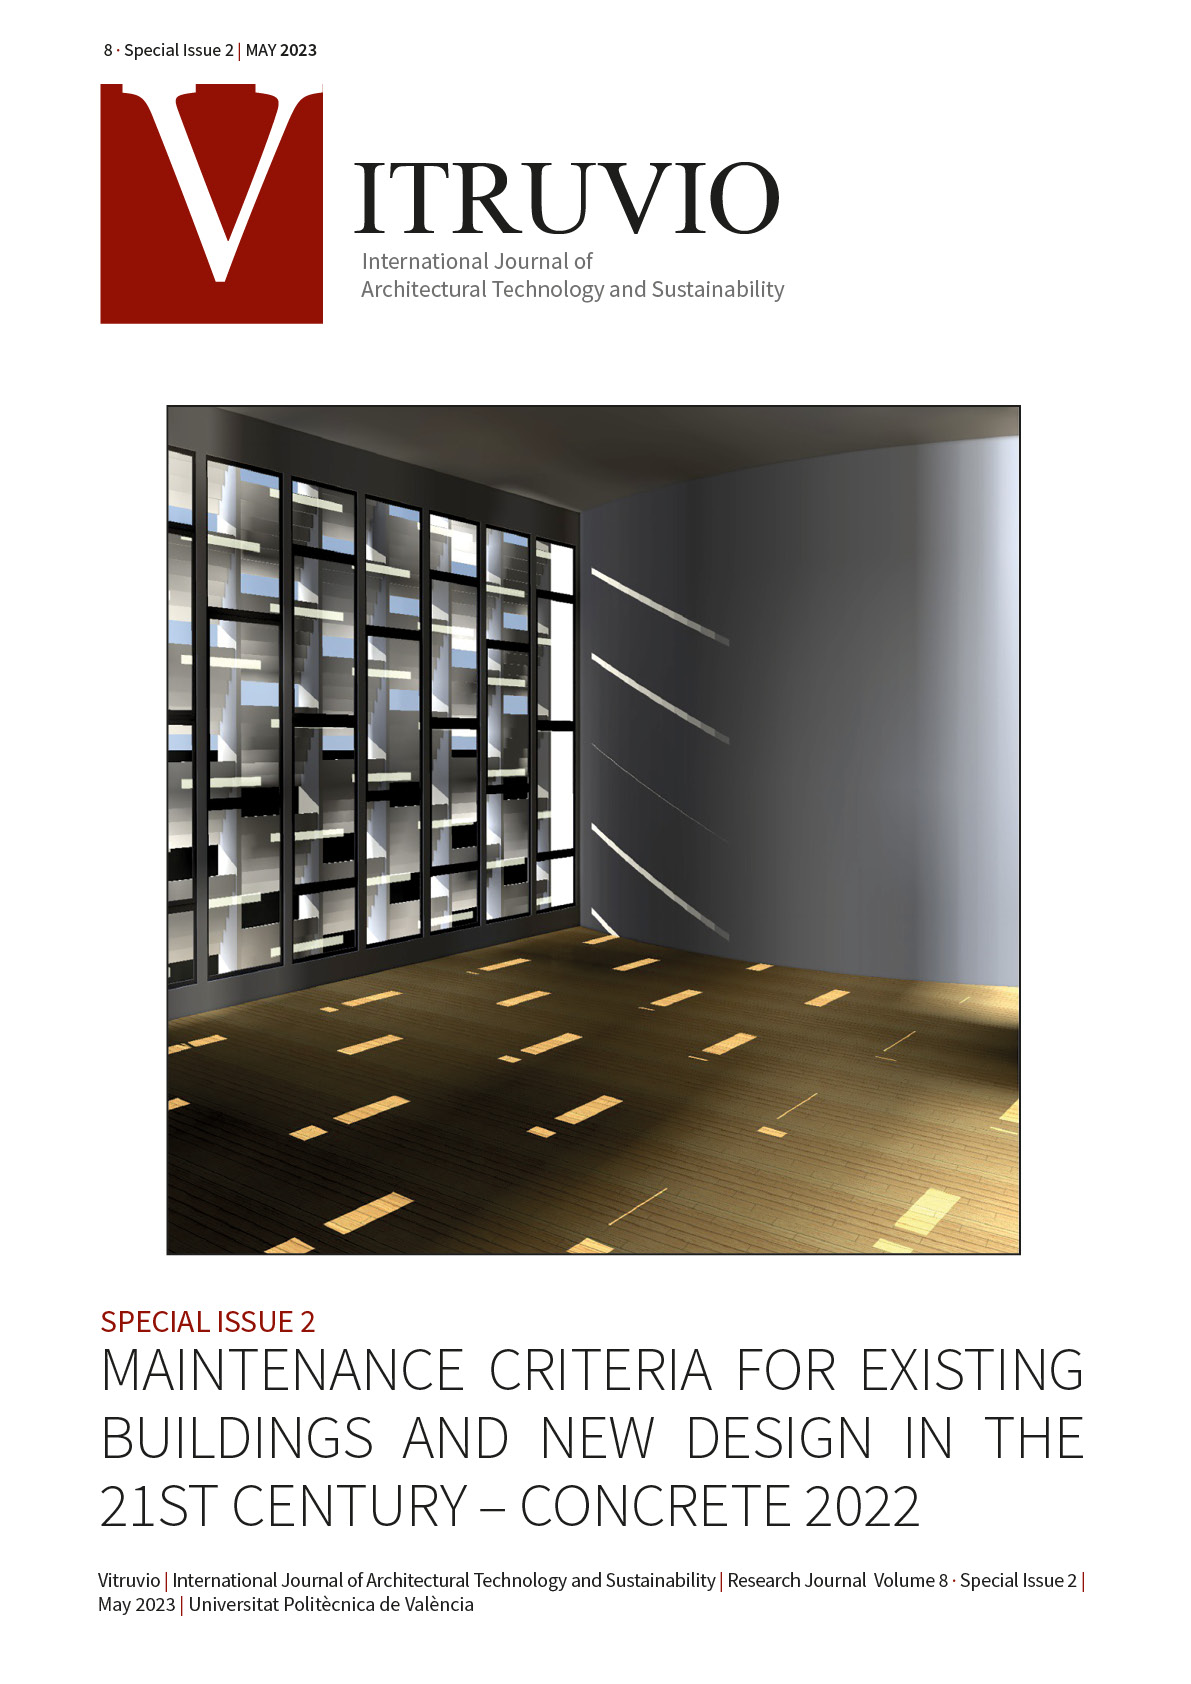 					View Vol. 8 (2023): Special Issue 2: MAINTENANCE CRITERIA FOR EXISTING BUILDINGS AND NEW DESIGN IN THE 21ST CENTURY- CONCRETE 2022
				